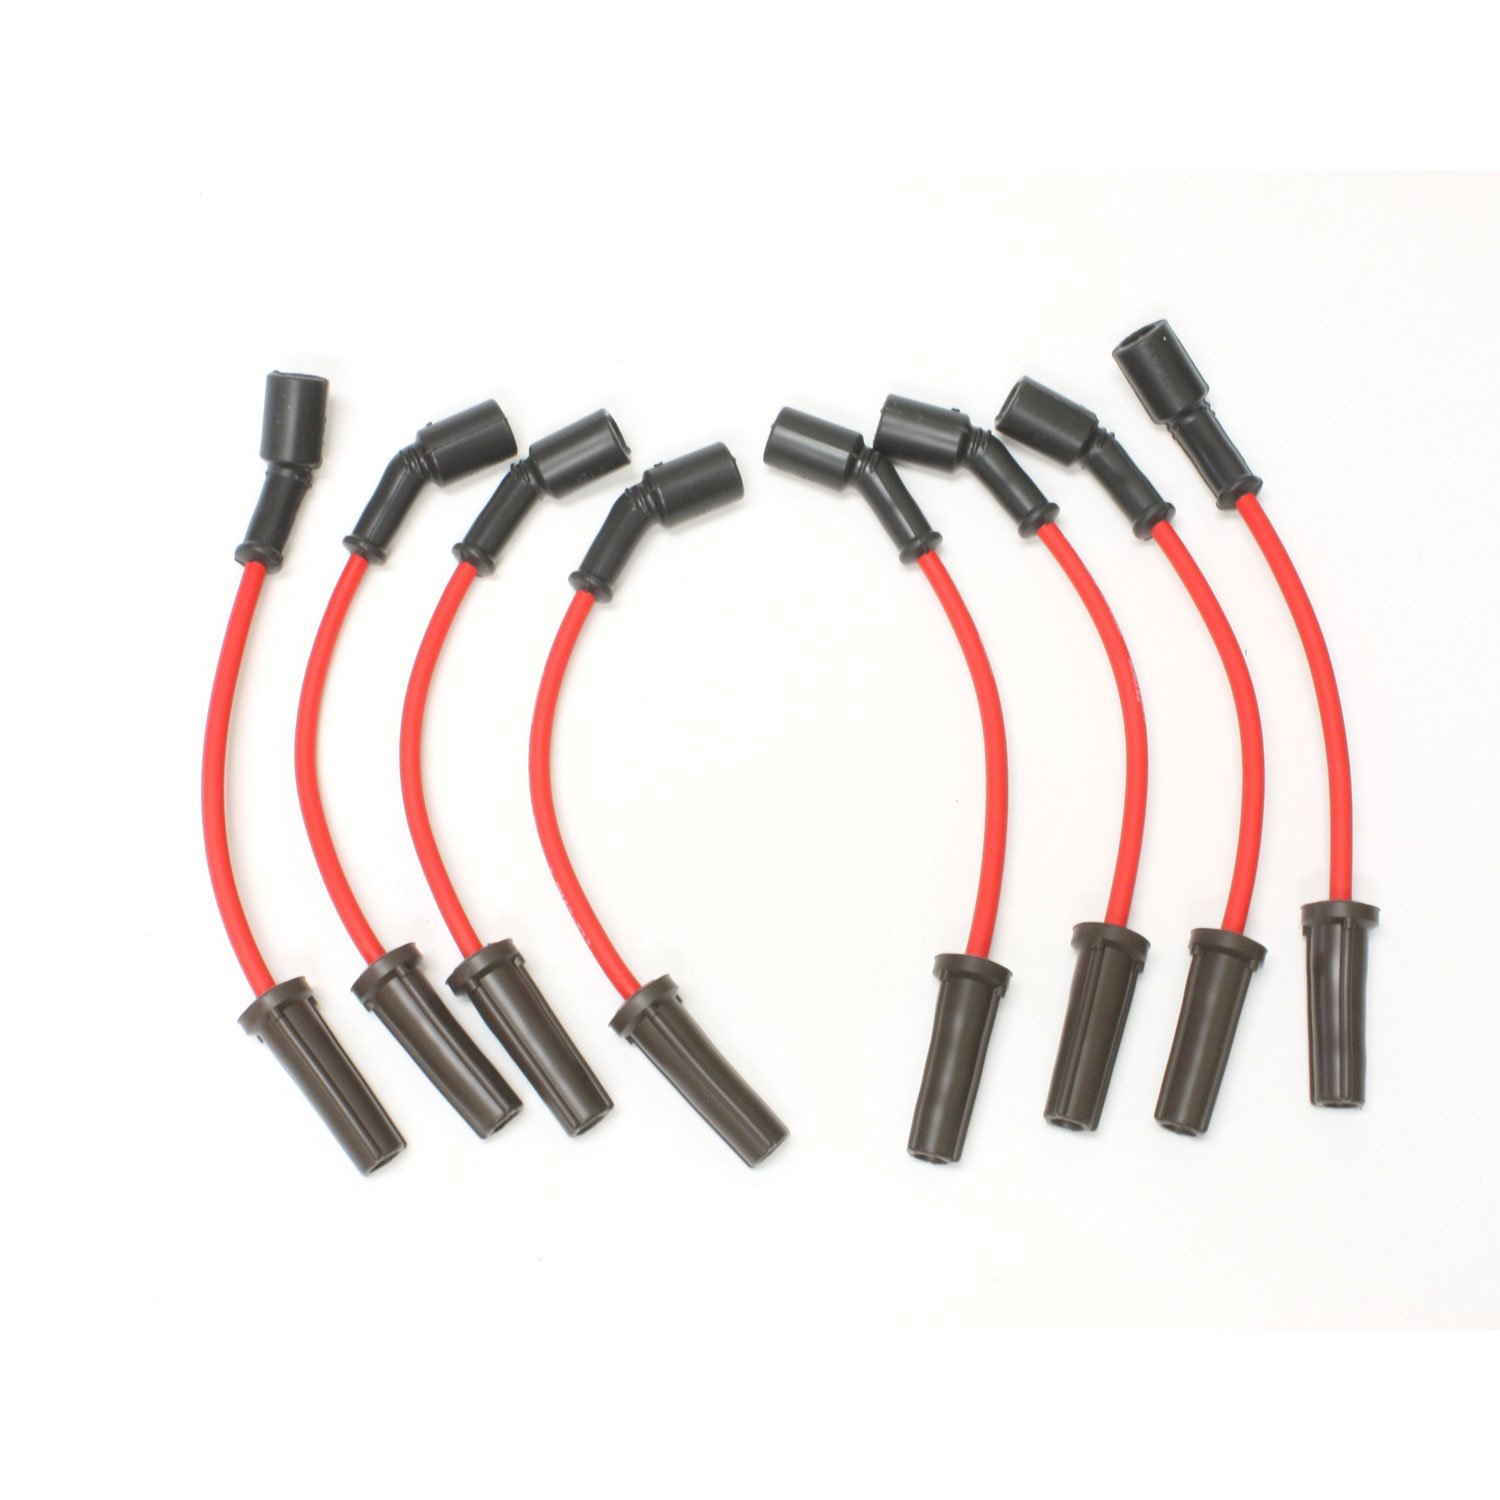 PerTronix 808423 Flame-Thrower Spark Plug Wires 8 cyl